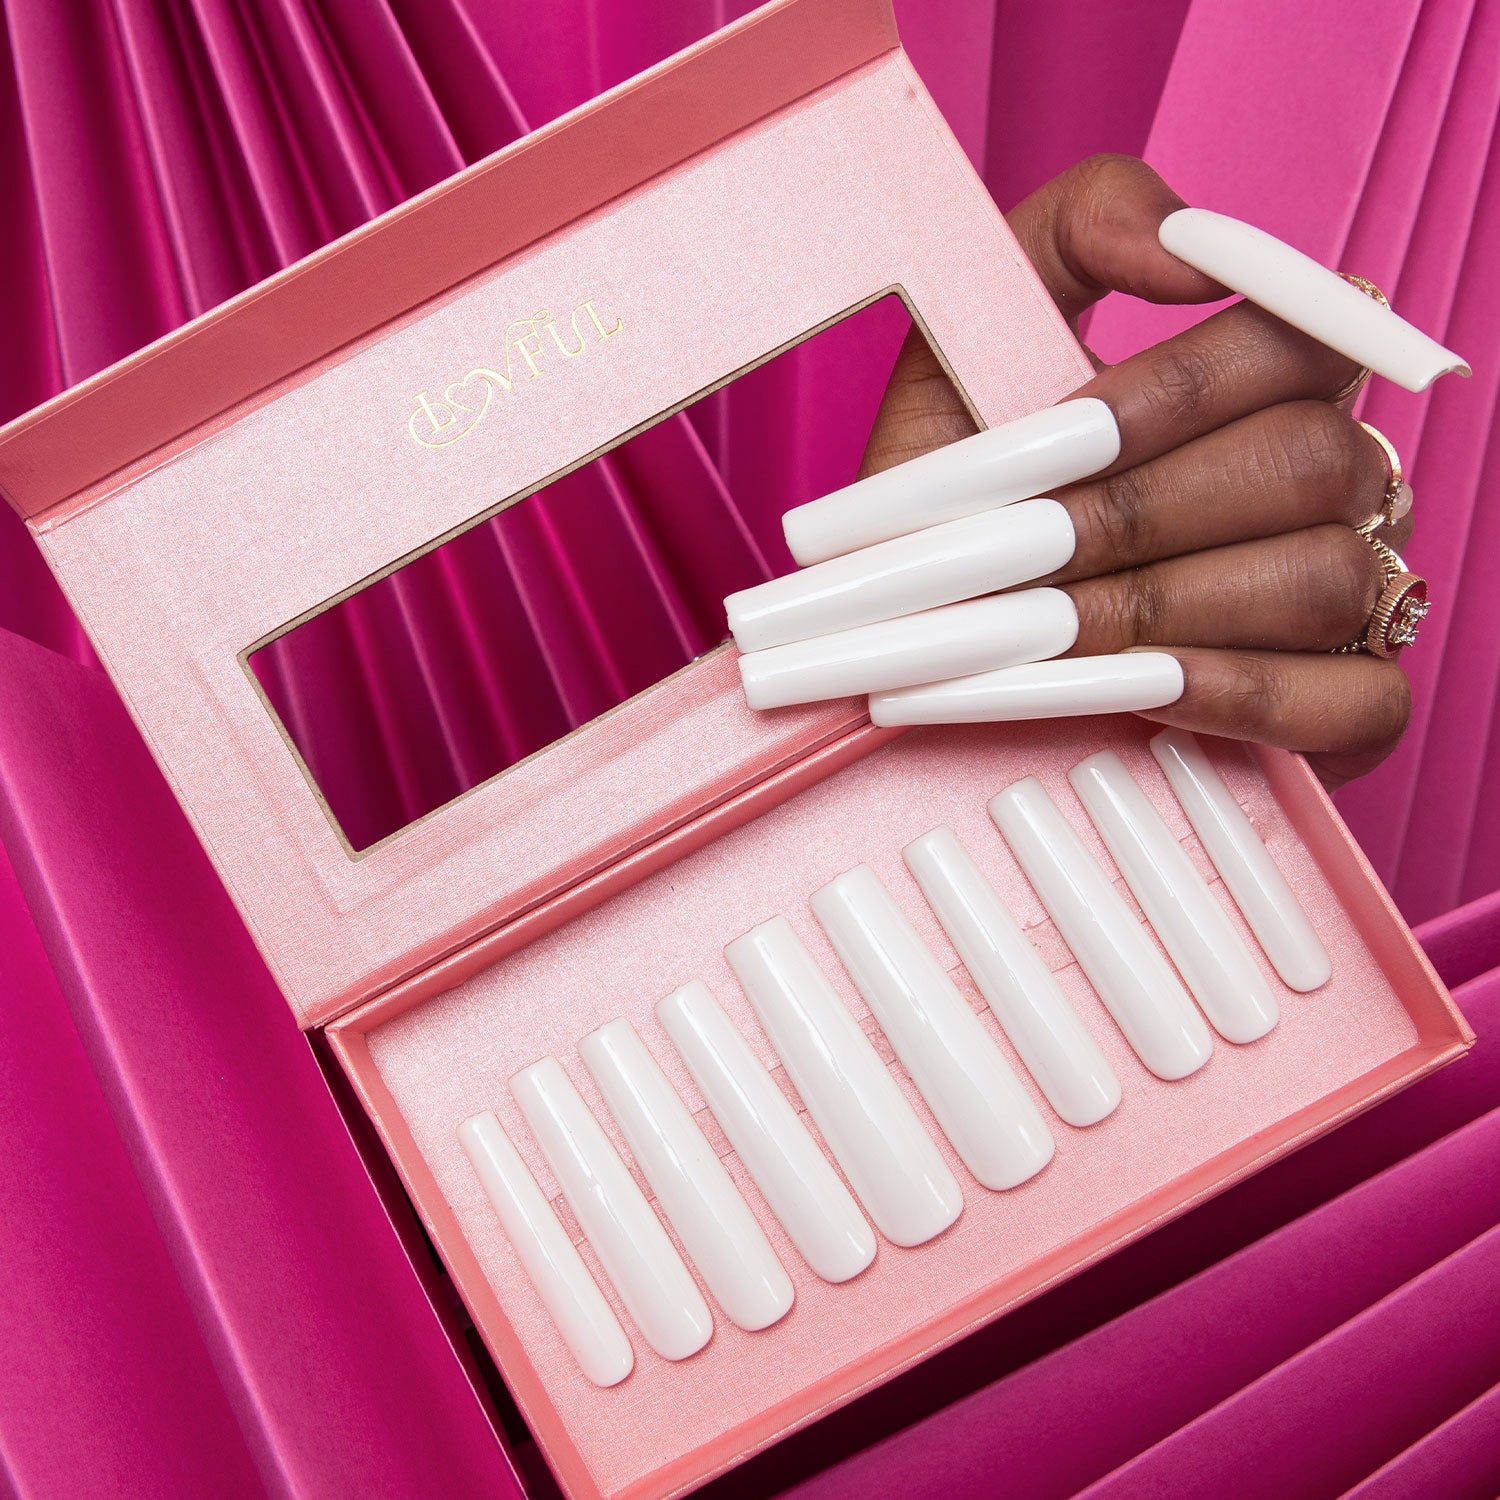 Hand displaying long white square-shaped press-on acrylic nails holding a Lovful pink box containing similar press-on nails against a pink pleated fabric background.